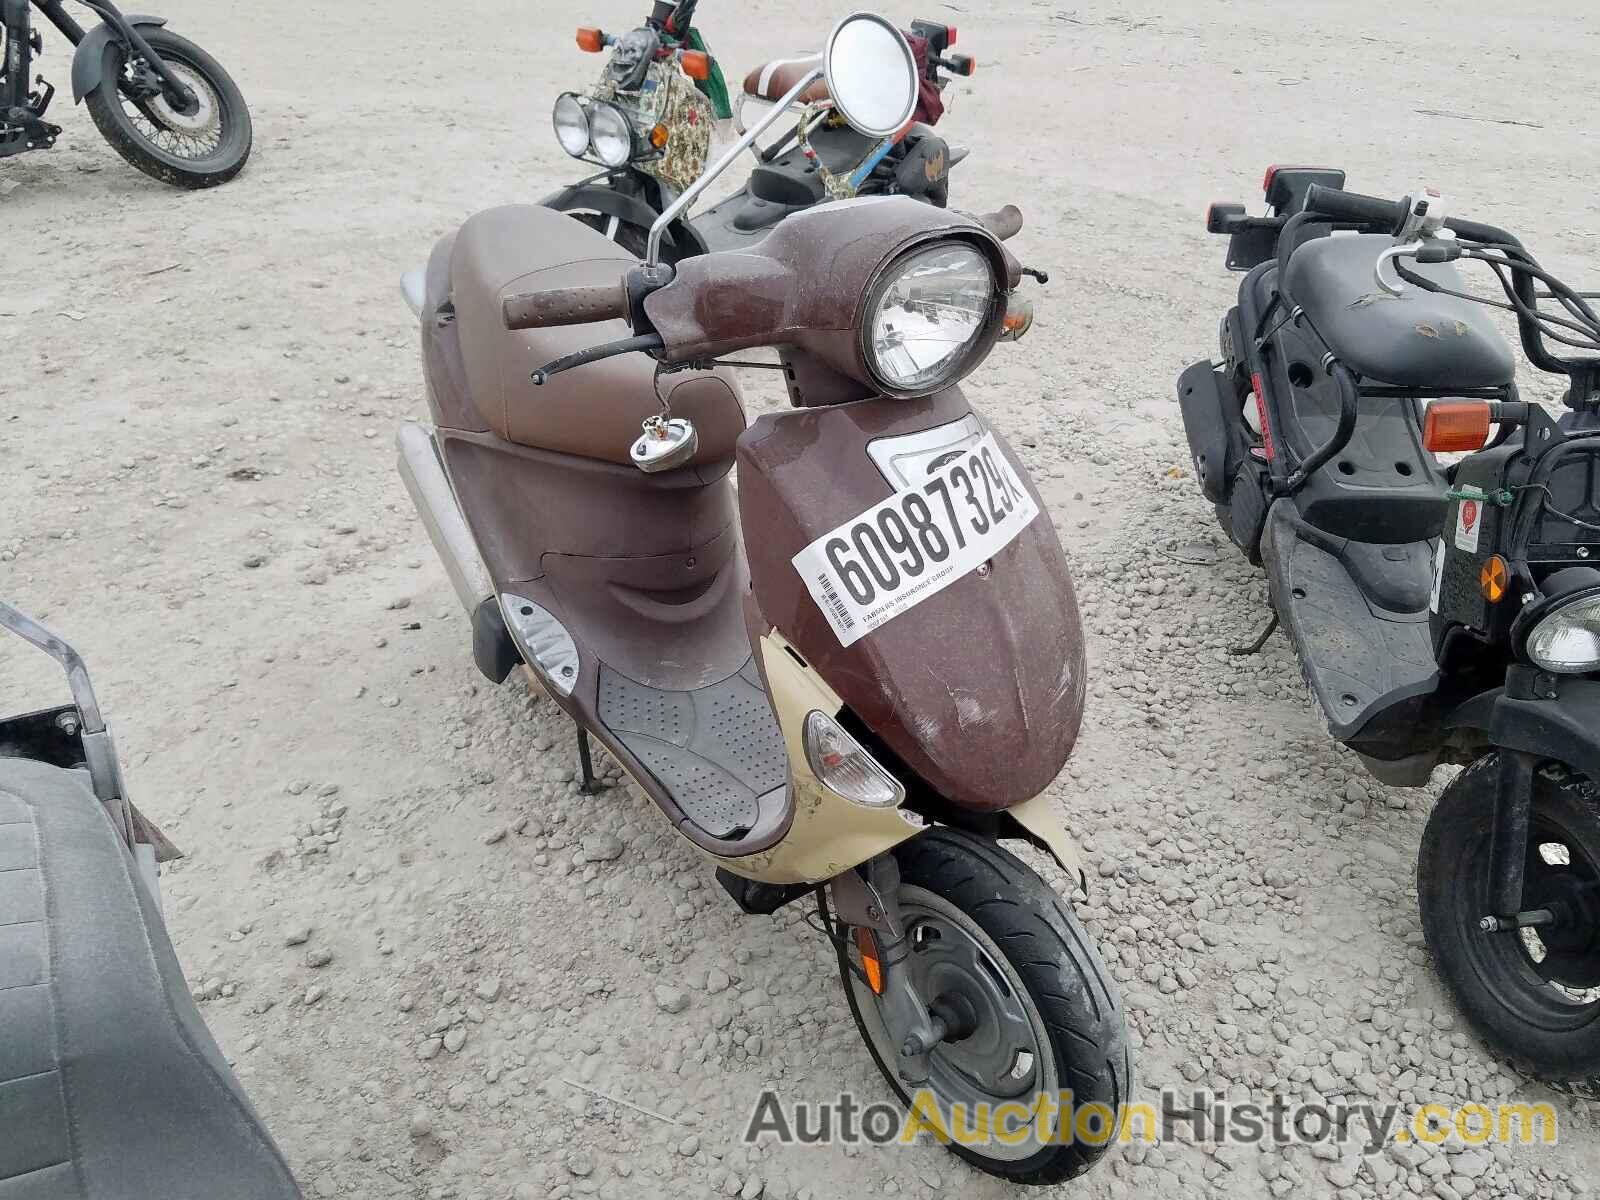 2012 GENUINE SCOOTER CO. SCOOTER 170I, RFVPAC908C1000185